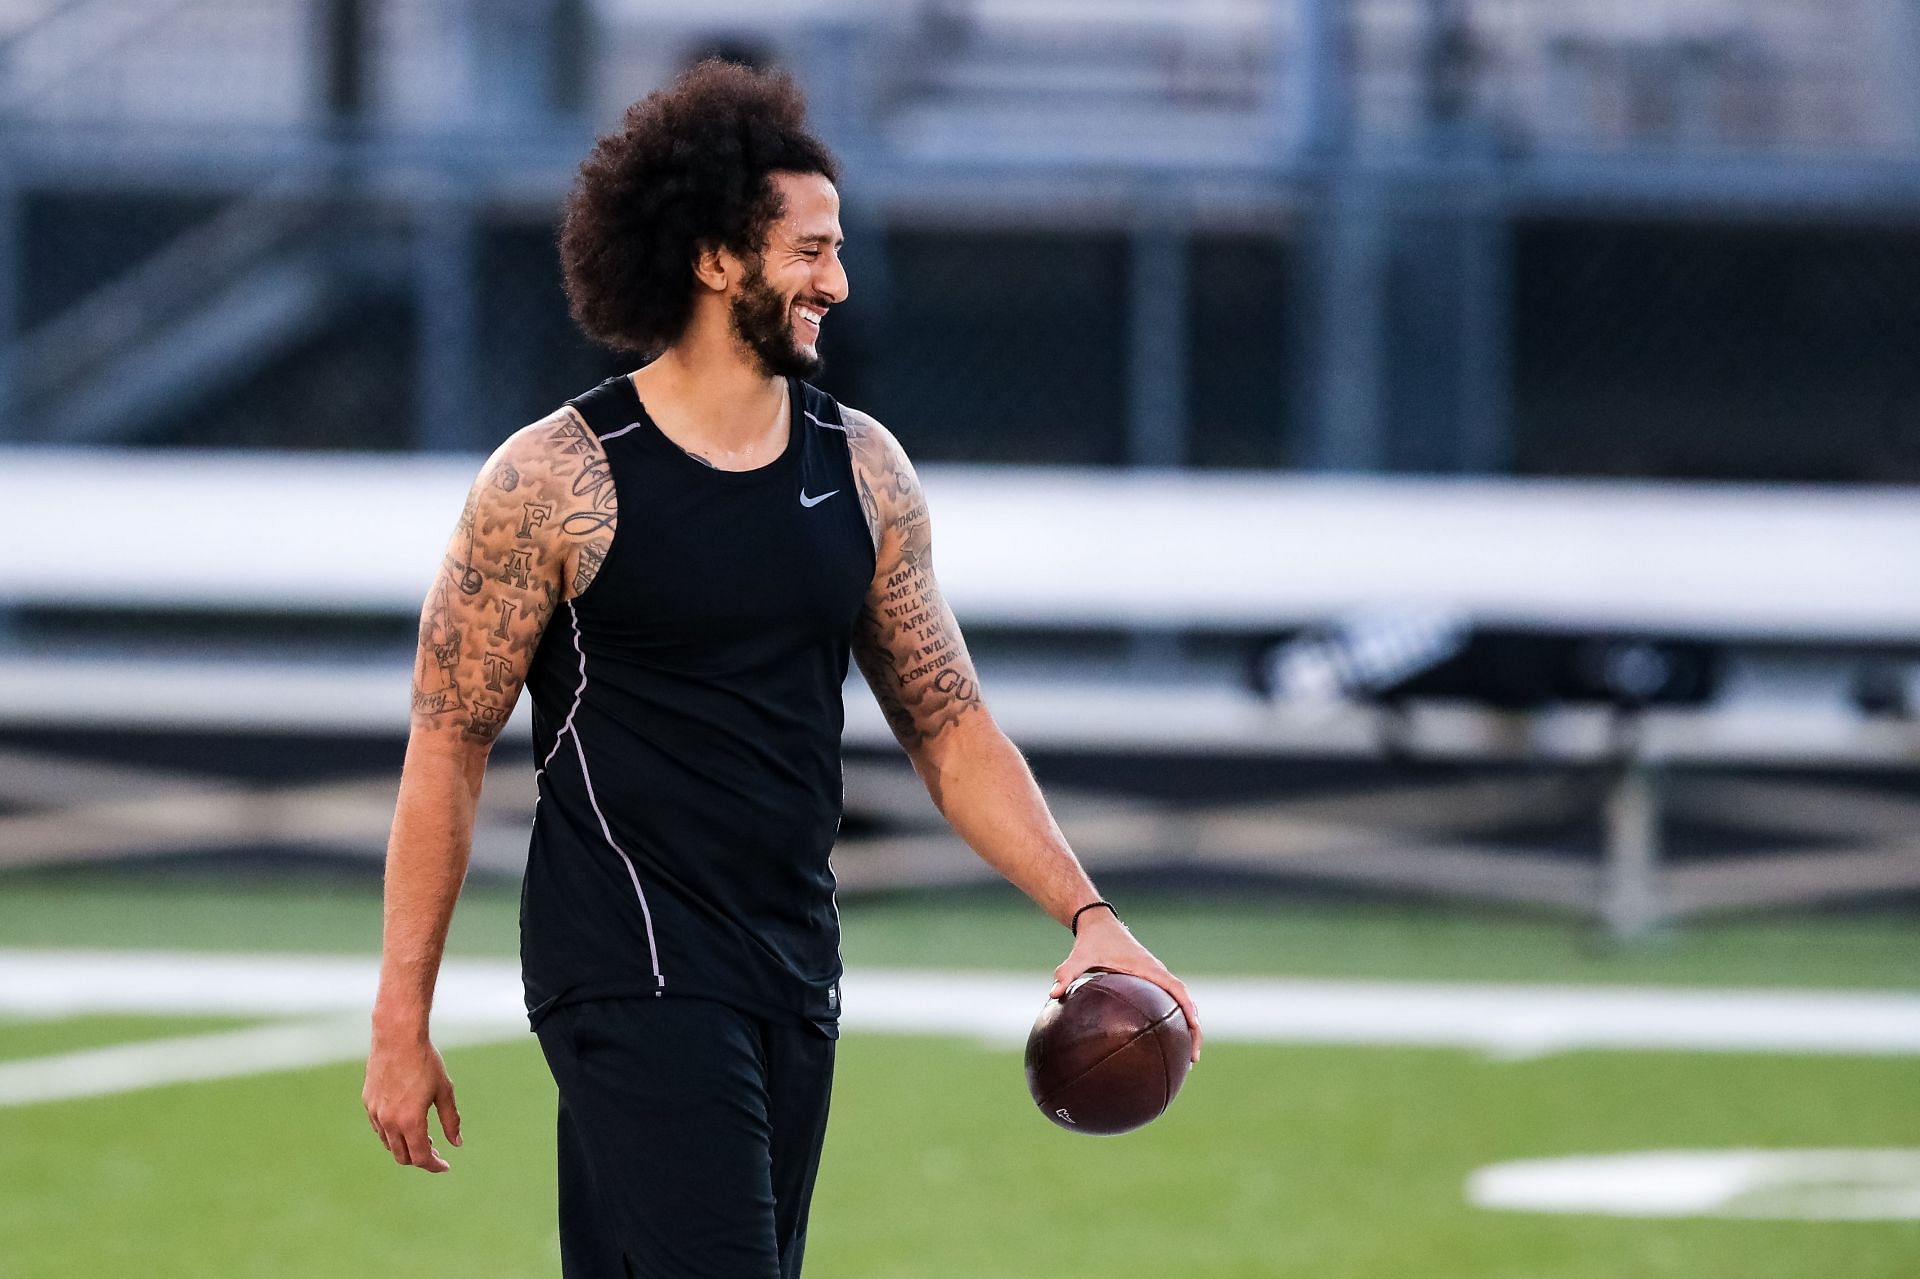 Colin Kaepernick has been hard at work to make a return to the NFL